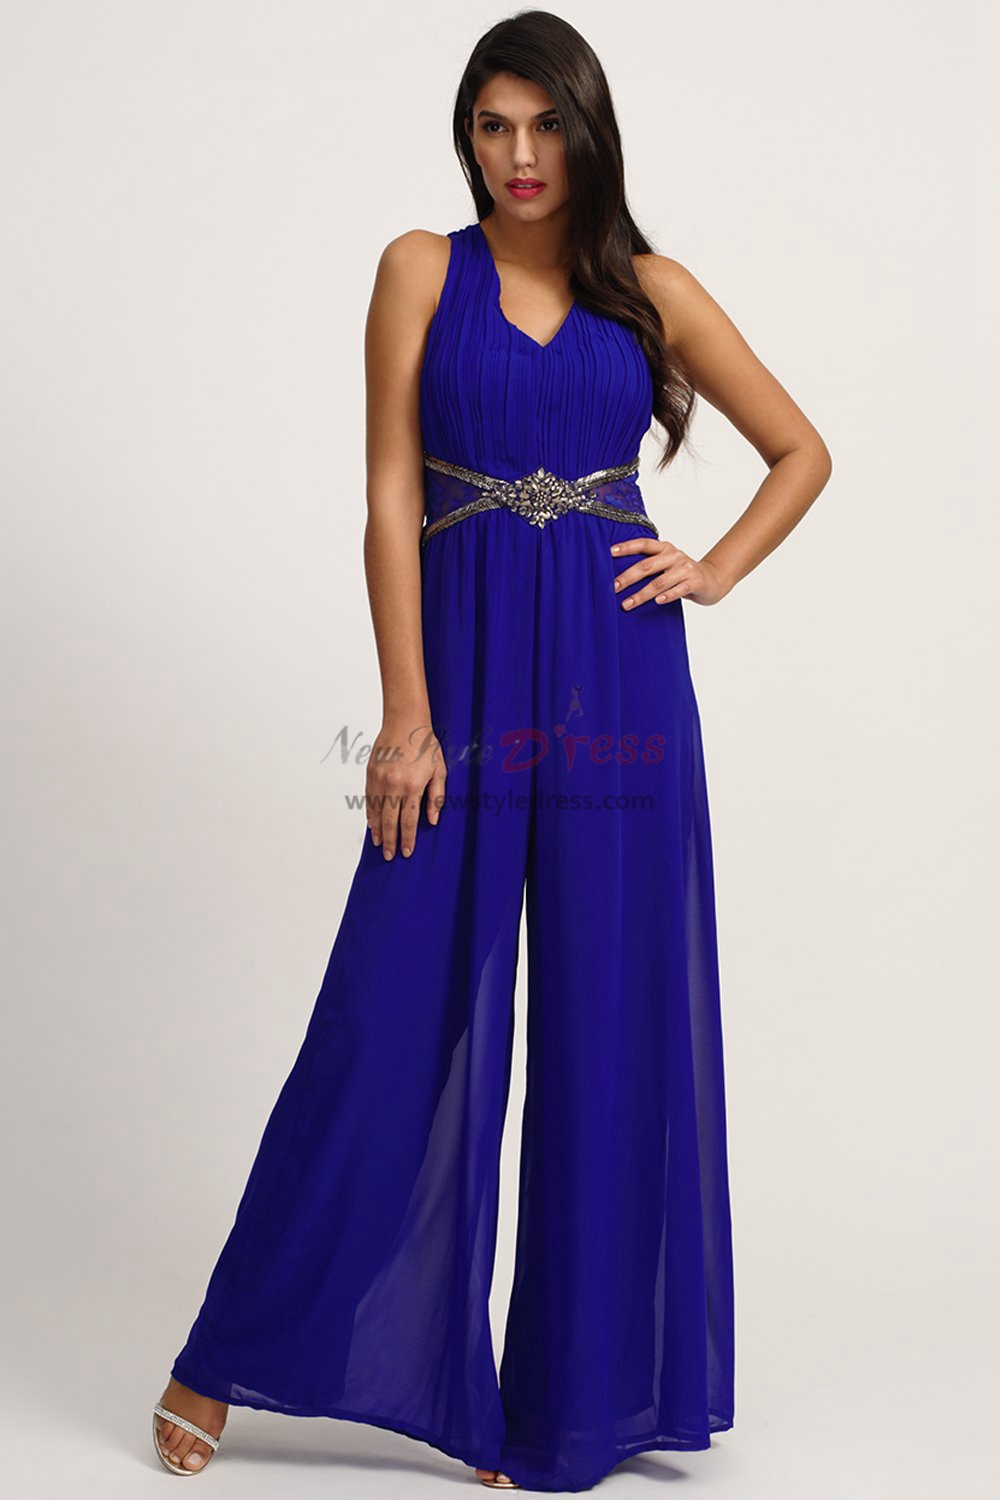 Royal blue chiffon prom jumpsuit with Criss-Cross Straps wps-175